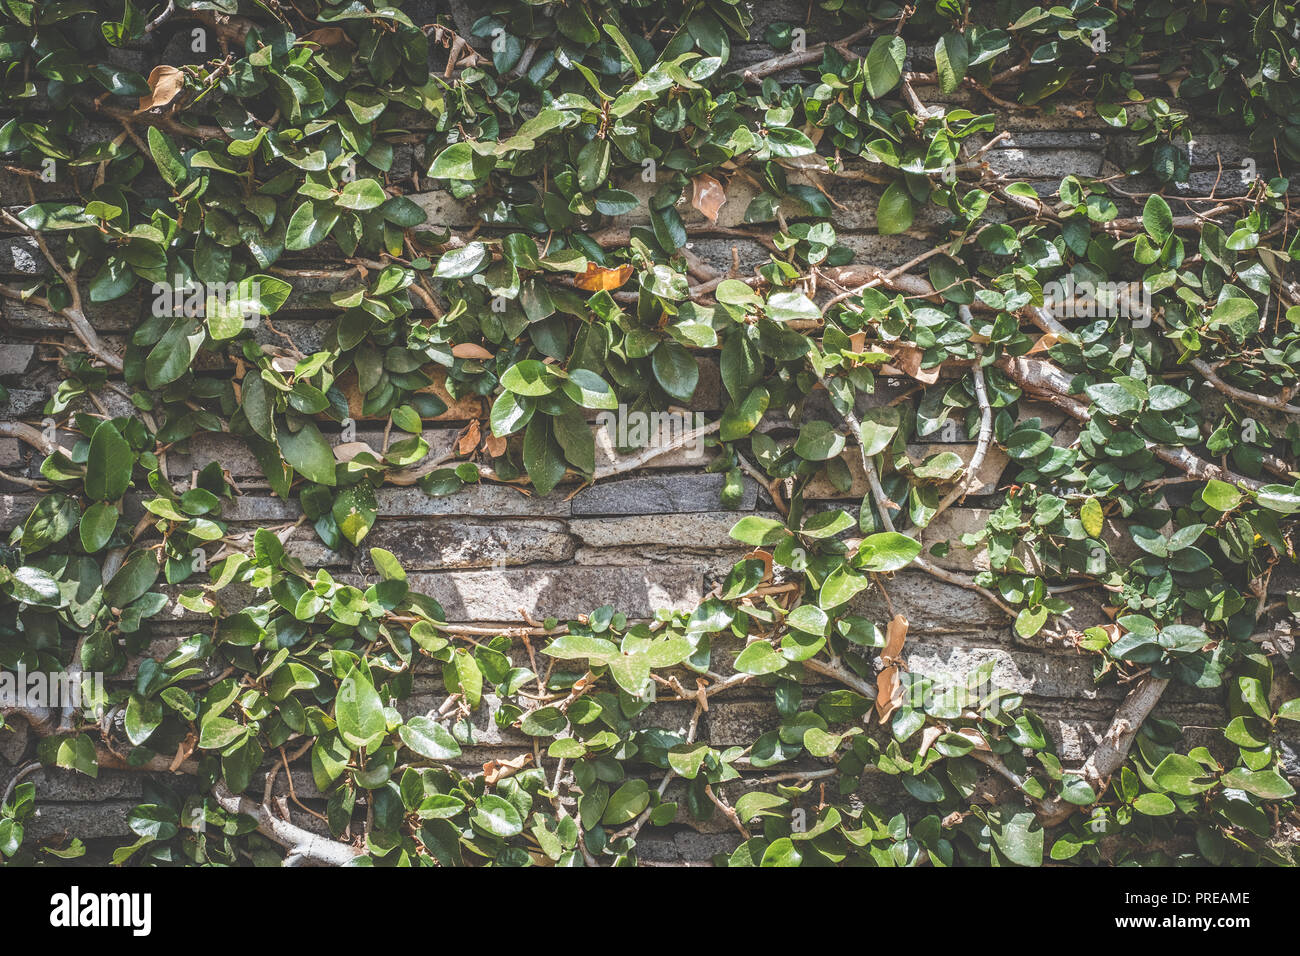 natural stone wall overgrown  with plants - garden background Stock Photo